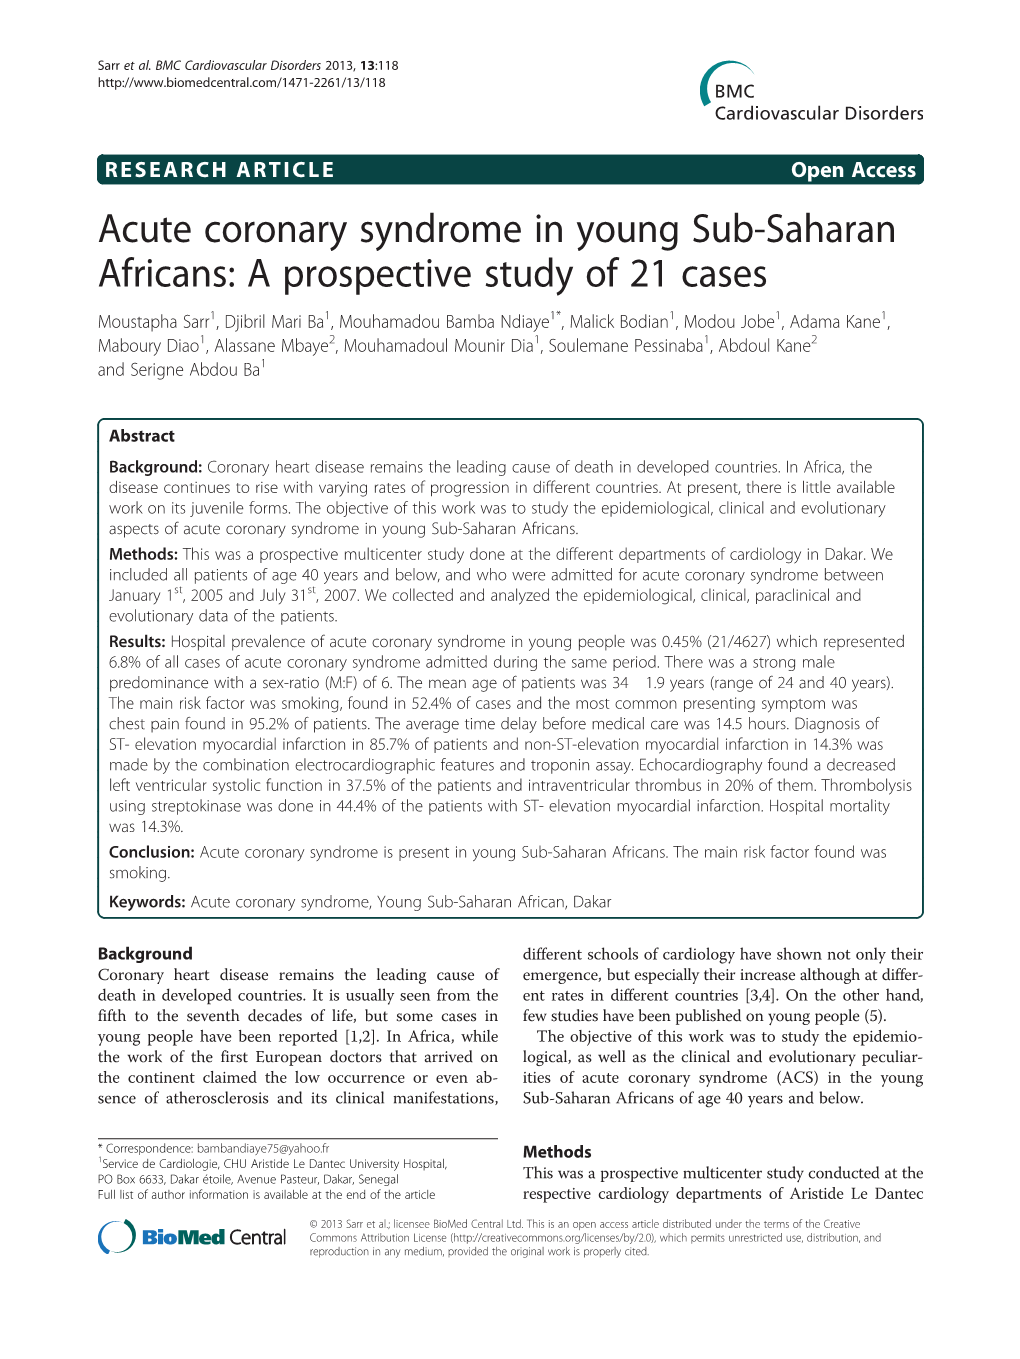 Acute Coronary Syndrome in Young Sub-Saharan Africans: A